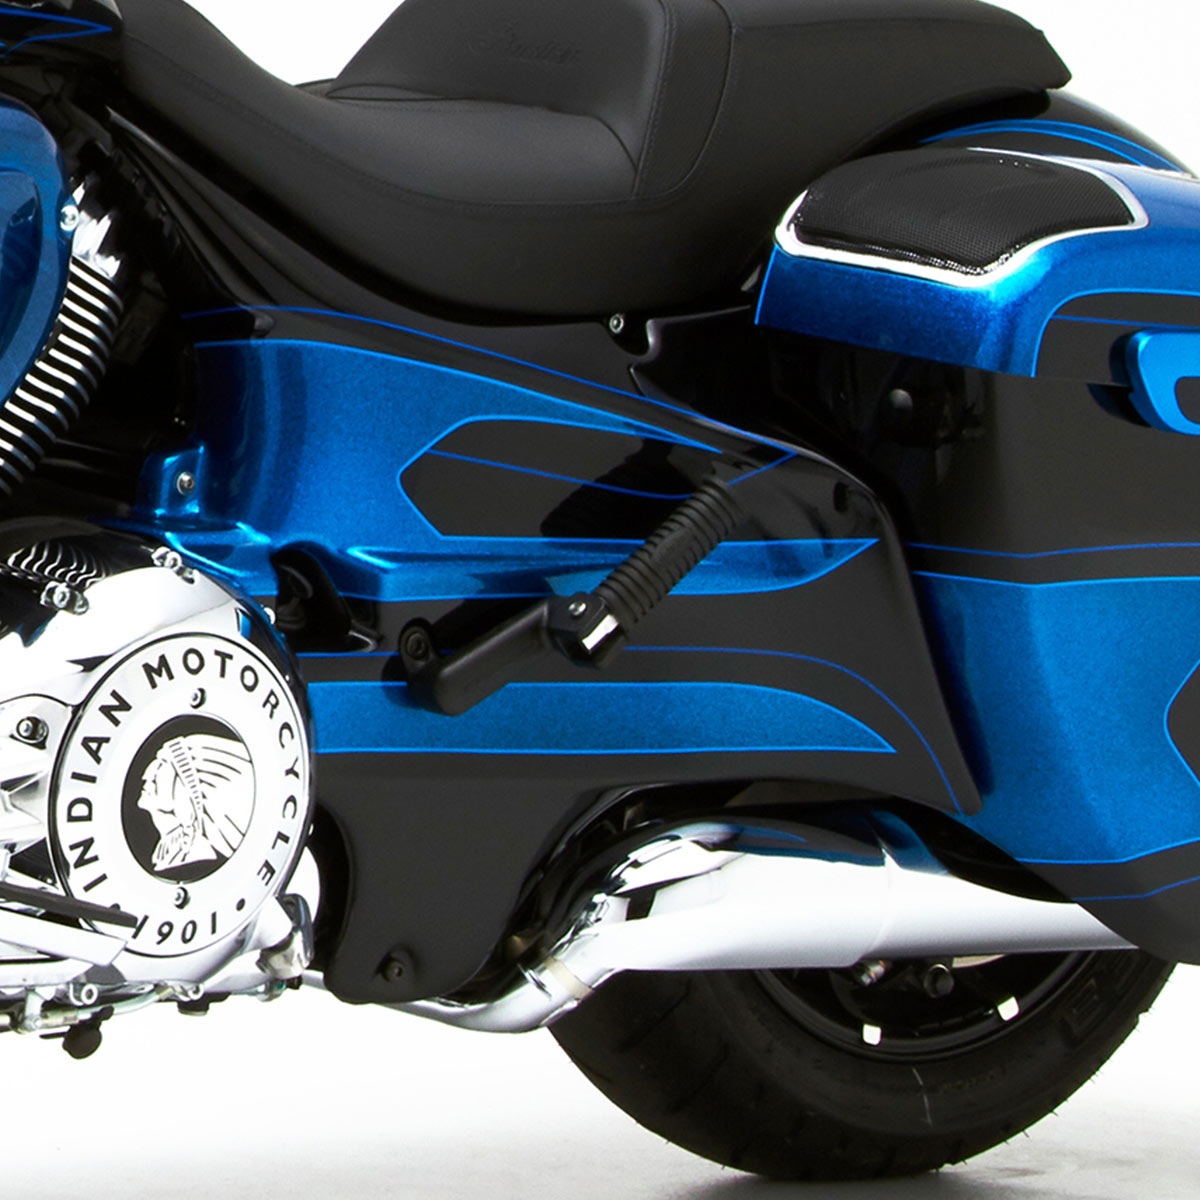 Reytelo Side Covers for Indian® 2019-2023 Chieftain Ltd, Dark Horse, Roadmaster, Springfield Motorcycles shown on 2019 Chieftain(Shown on 2019 Chieftain)